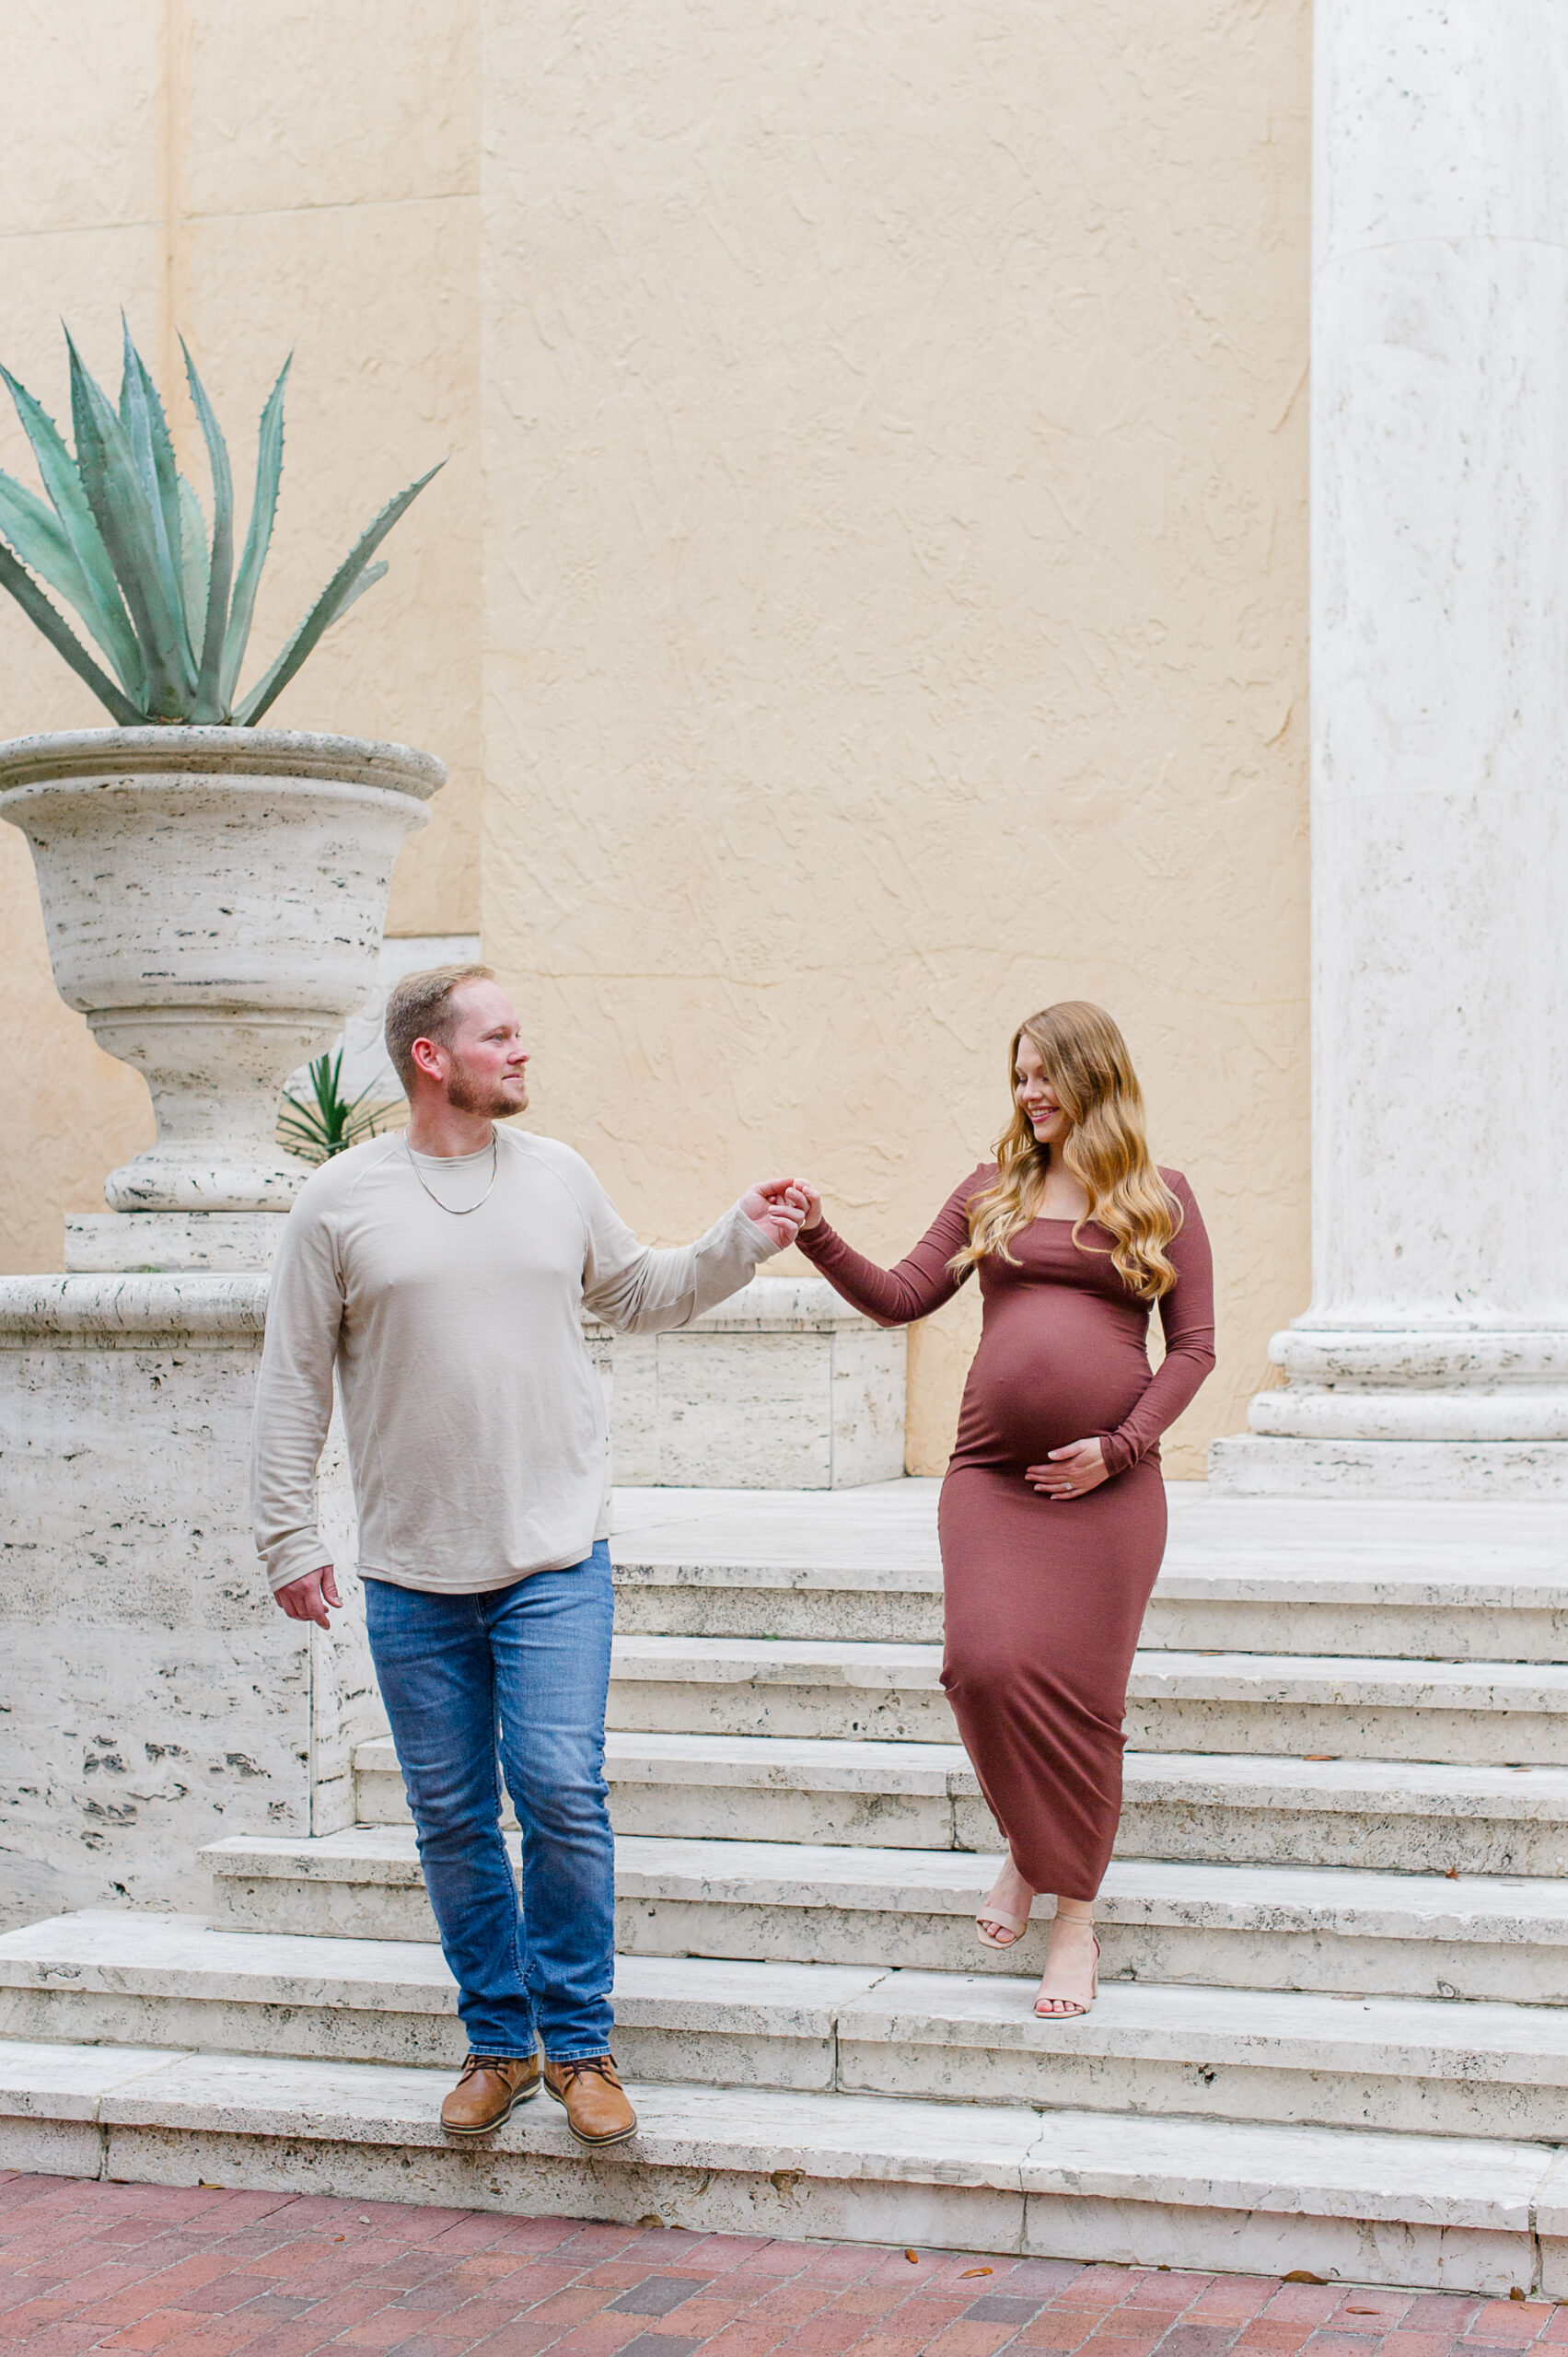 New father assists pregnant mother down steps while looking back at her lovingly during their maternity photo session.